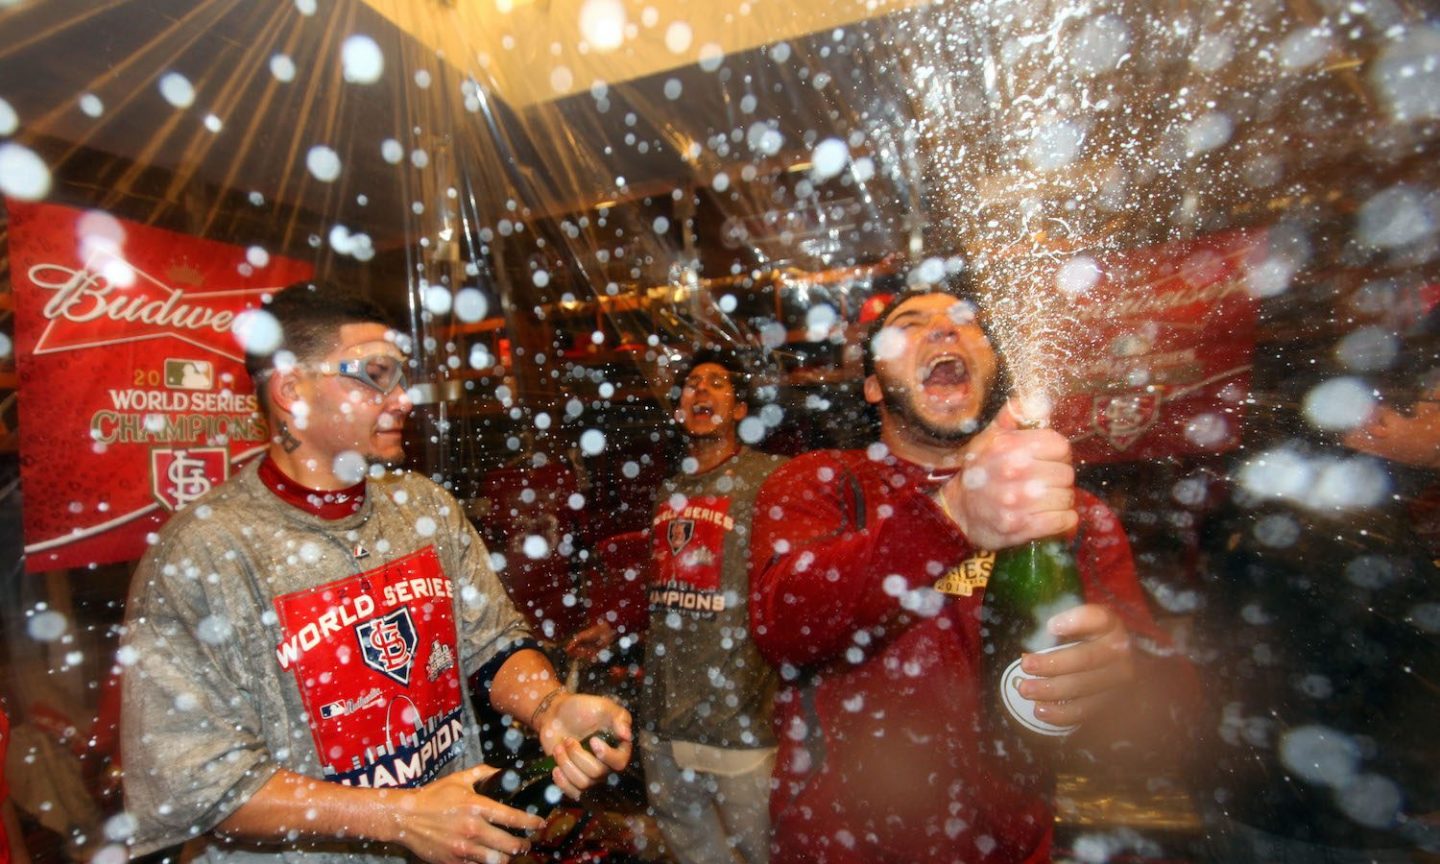 The St. Louis Cardinals celebrate winning Game Seven of Major League Baseball's World Series at Busch Stadium on October 28, 2011. (Getty Images)